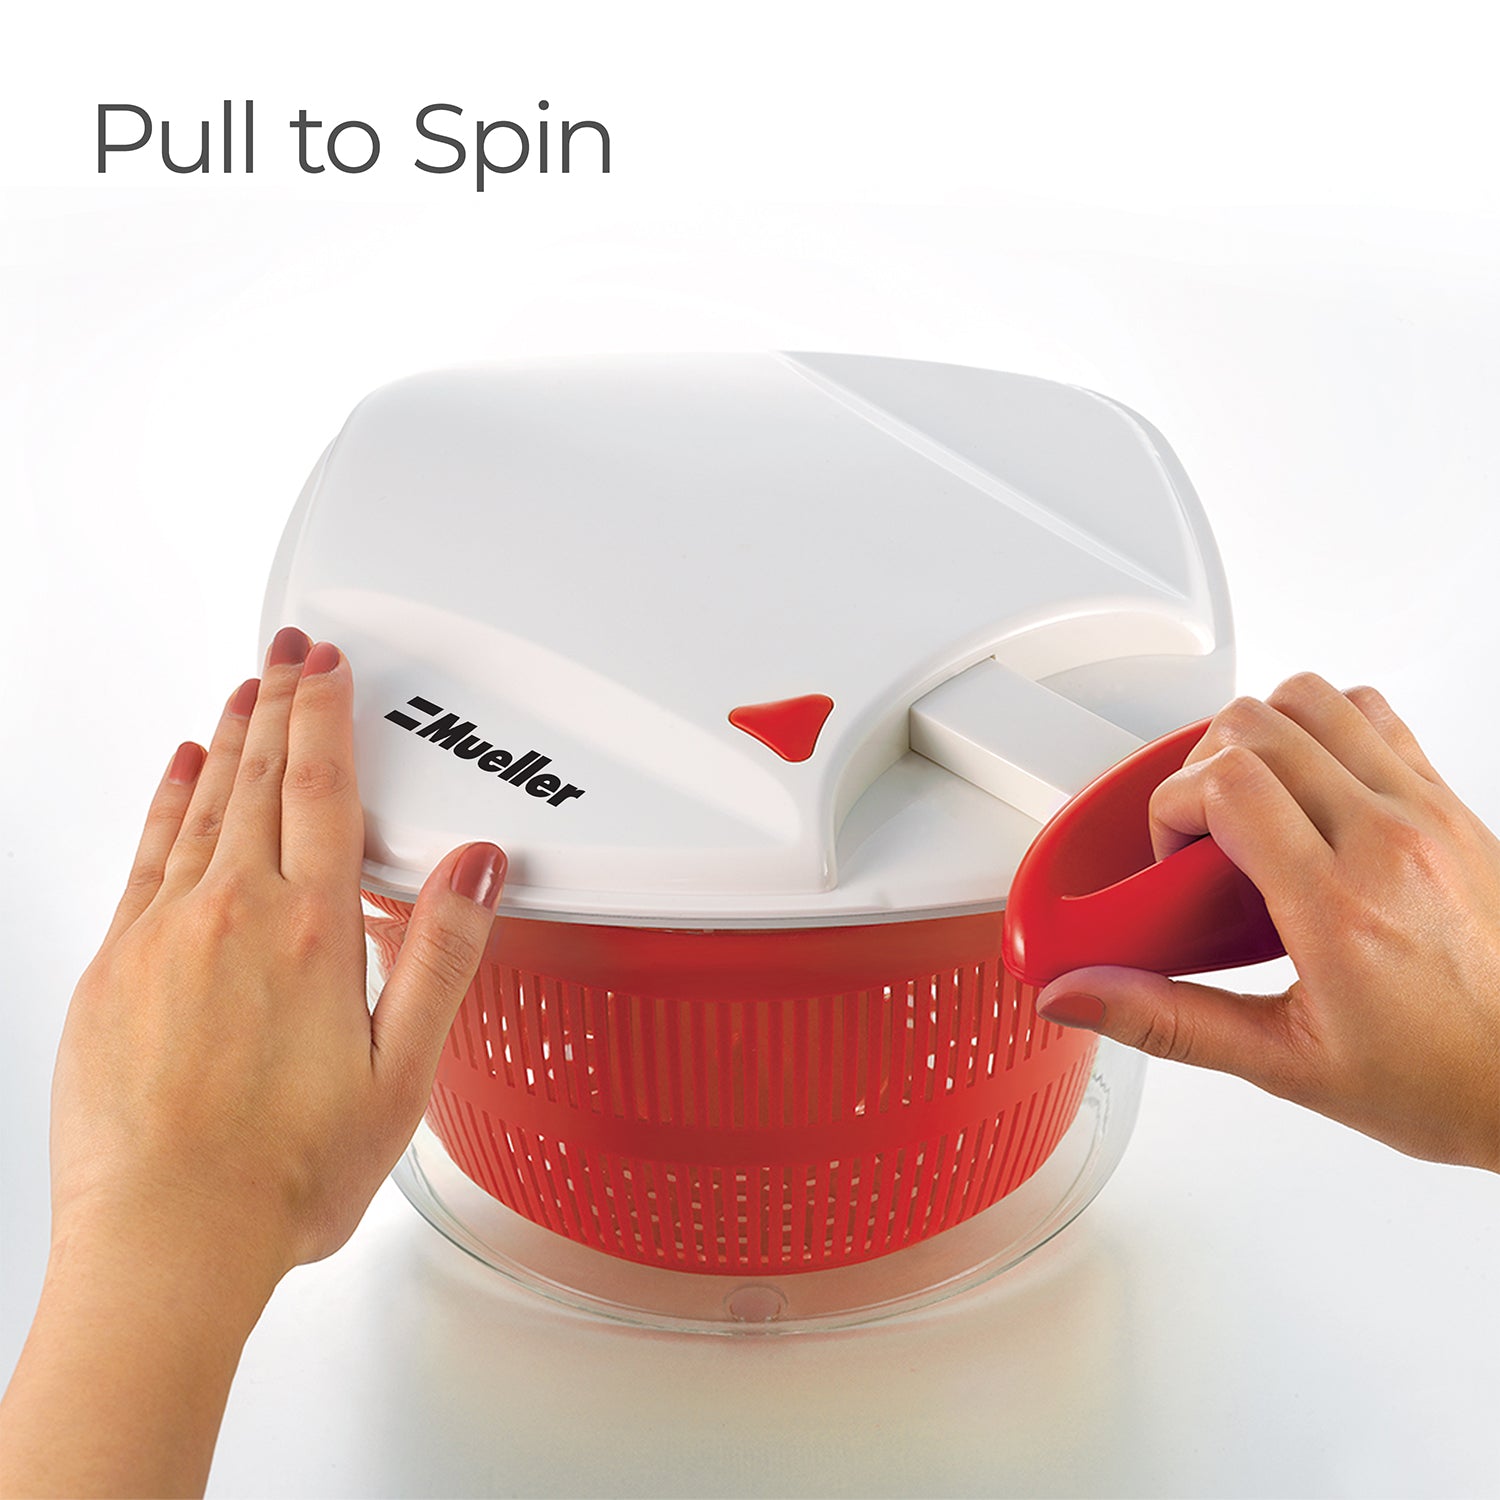 6 Best Salad Spinners To Buy In 2022 - Top-Rated Salad Spinners